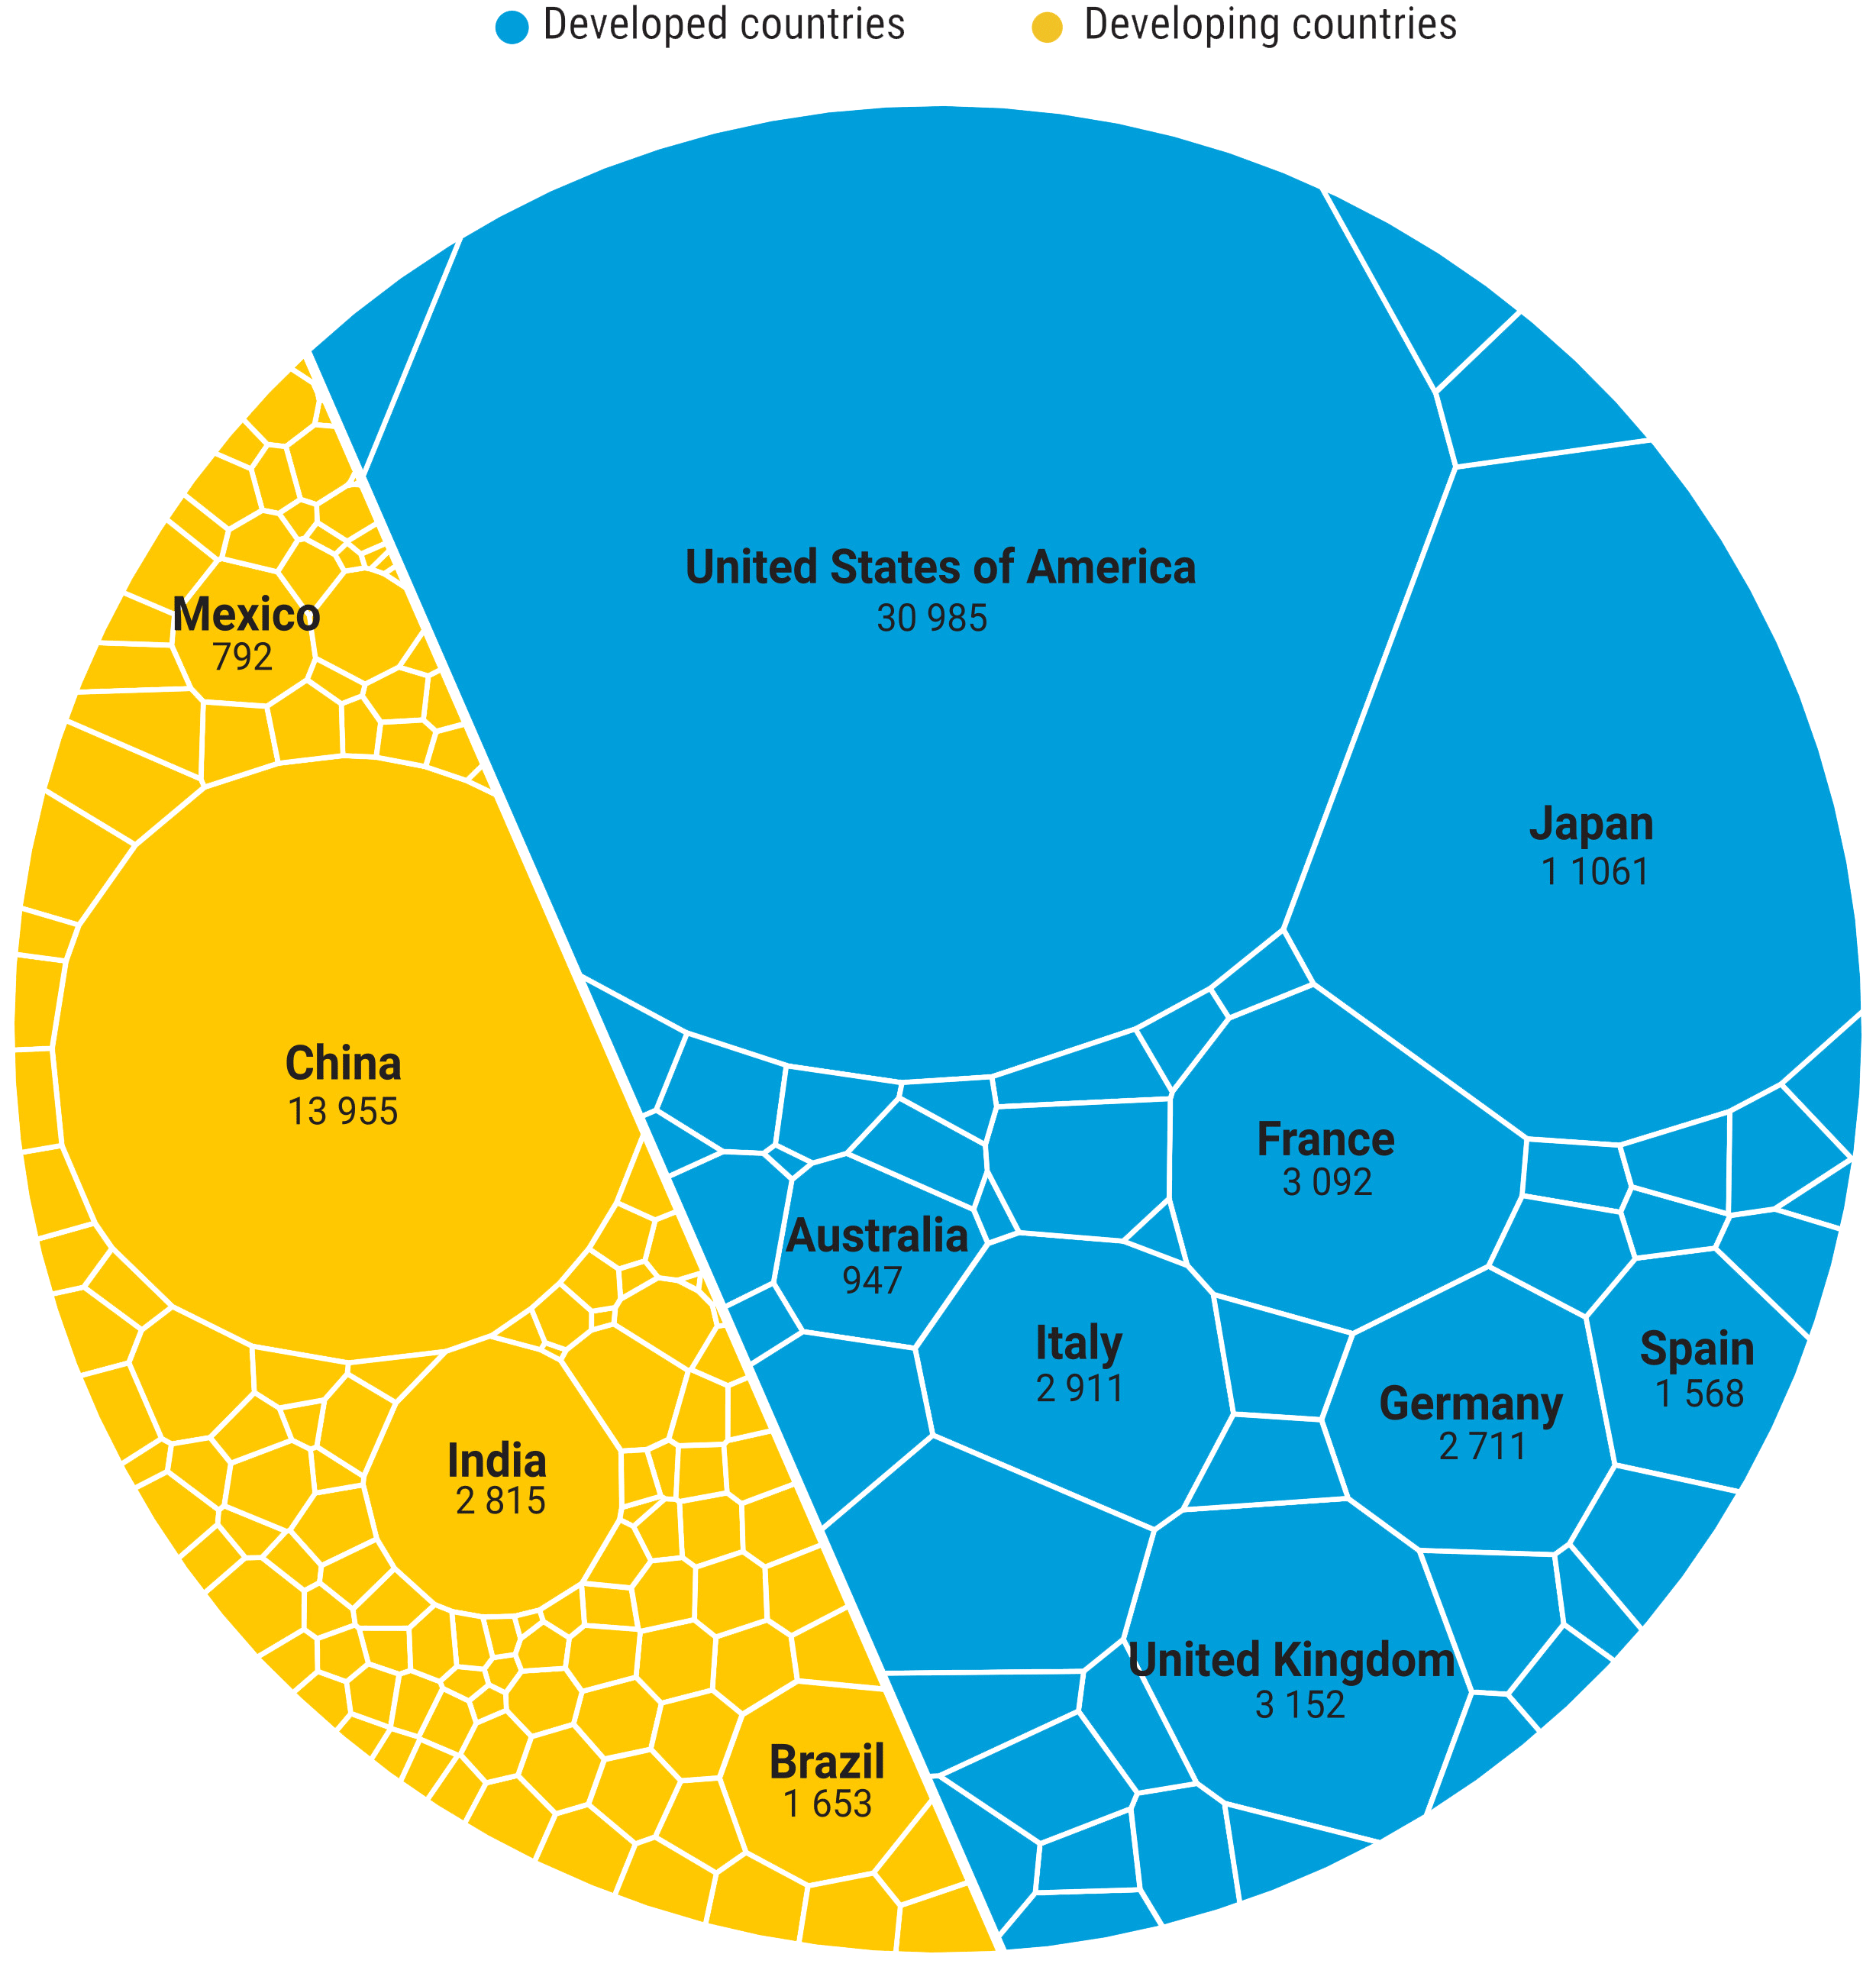 Inside a circular graph a straight line divides several figures in blue representing developed countries and in yellow developing countries. The size of each figure is proportional to the public debt